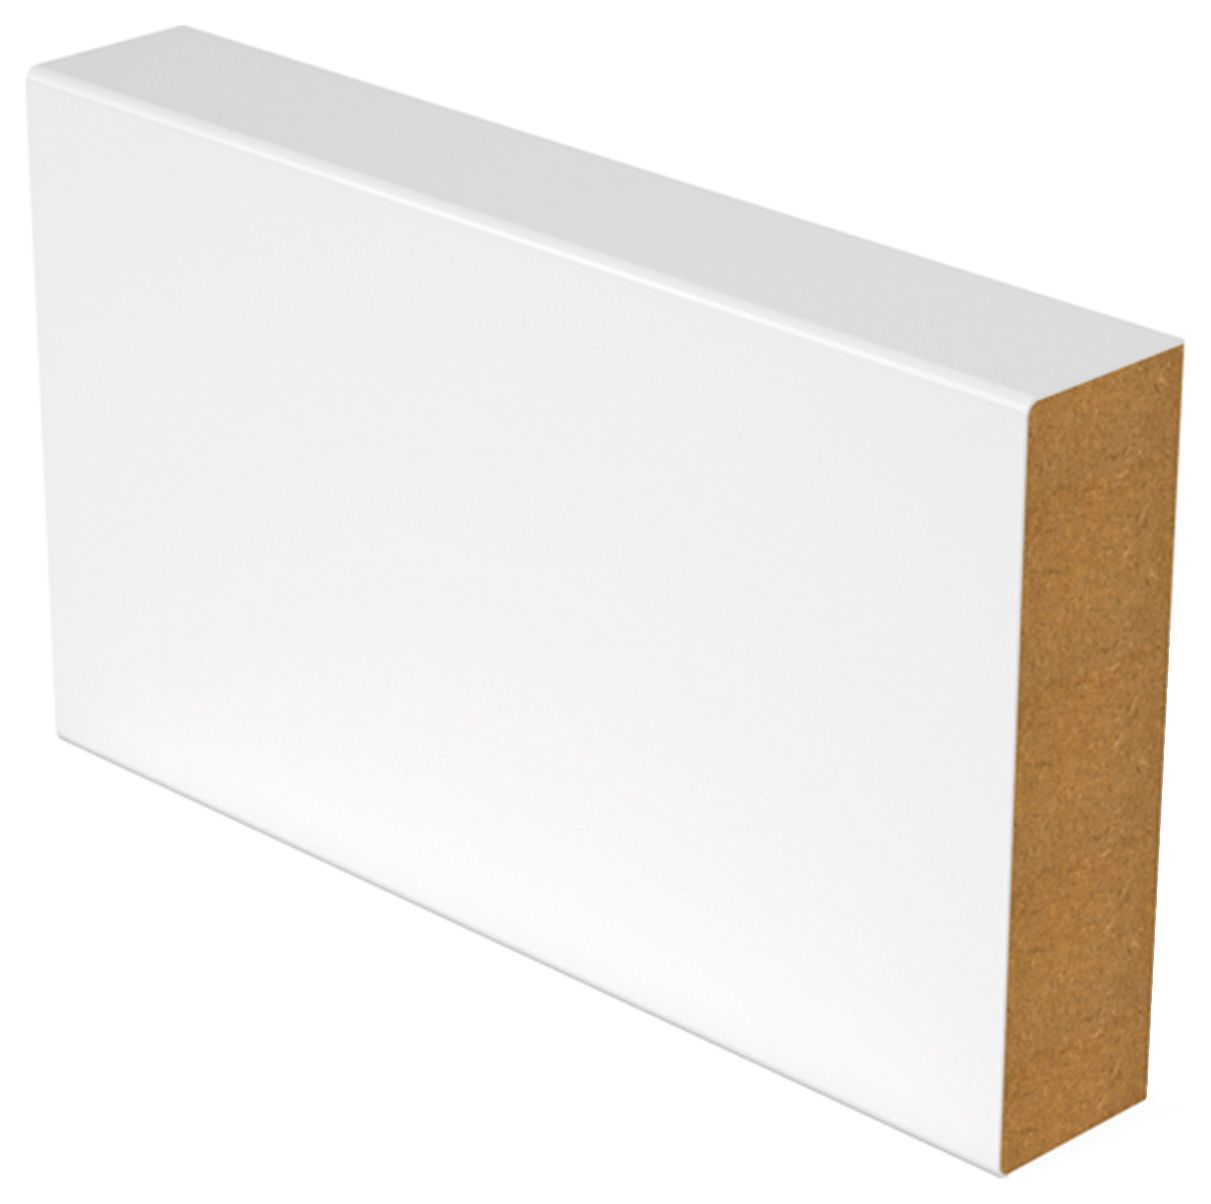 Image of Wickes Square Edge Skirting - 18 x 119 x 3660mm